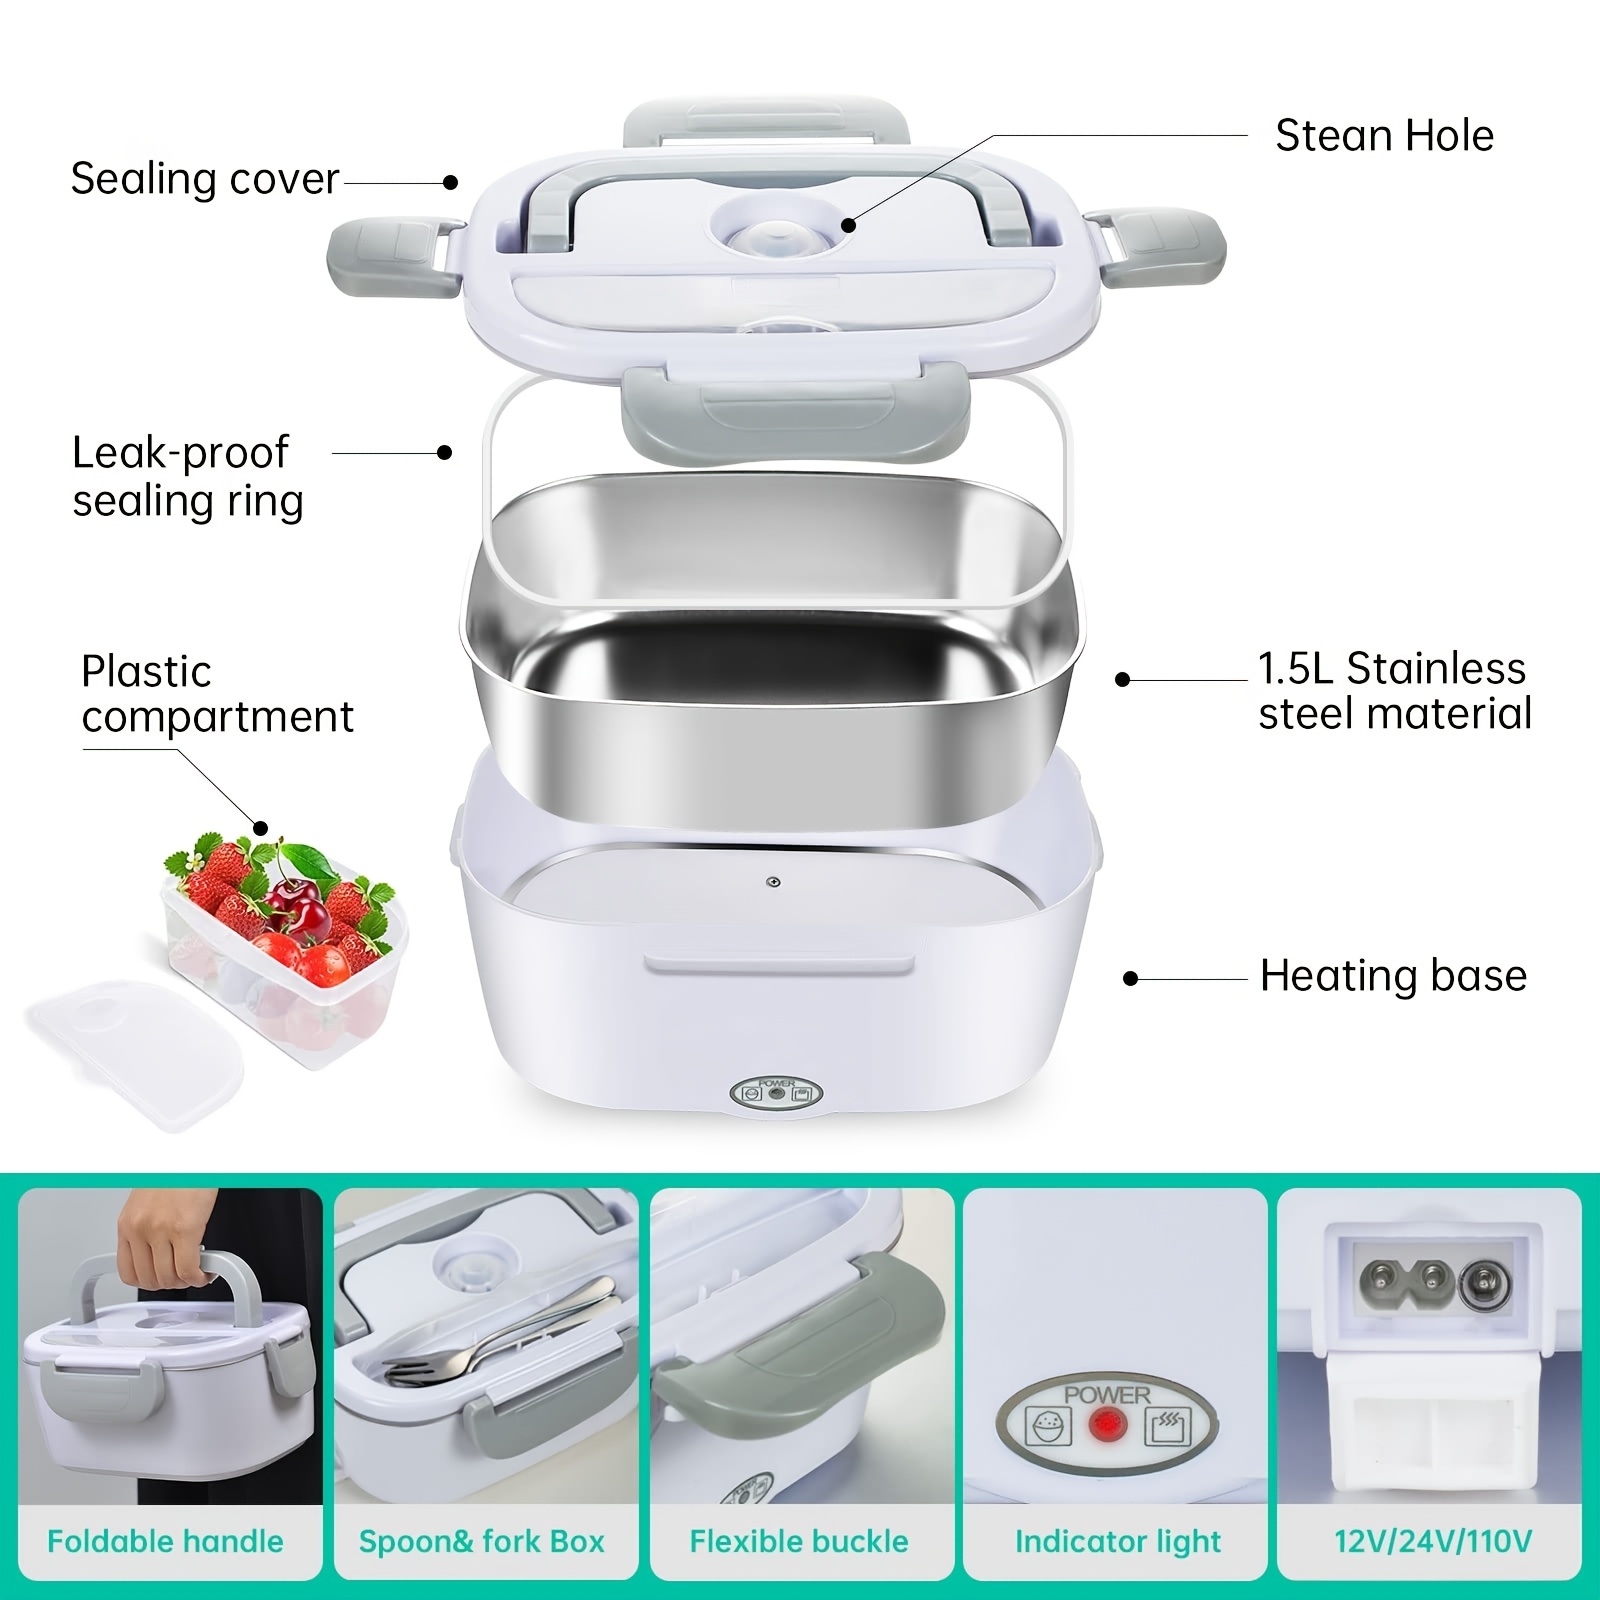  Electric Lunch Box, 3 in 1 Food Heater Portable